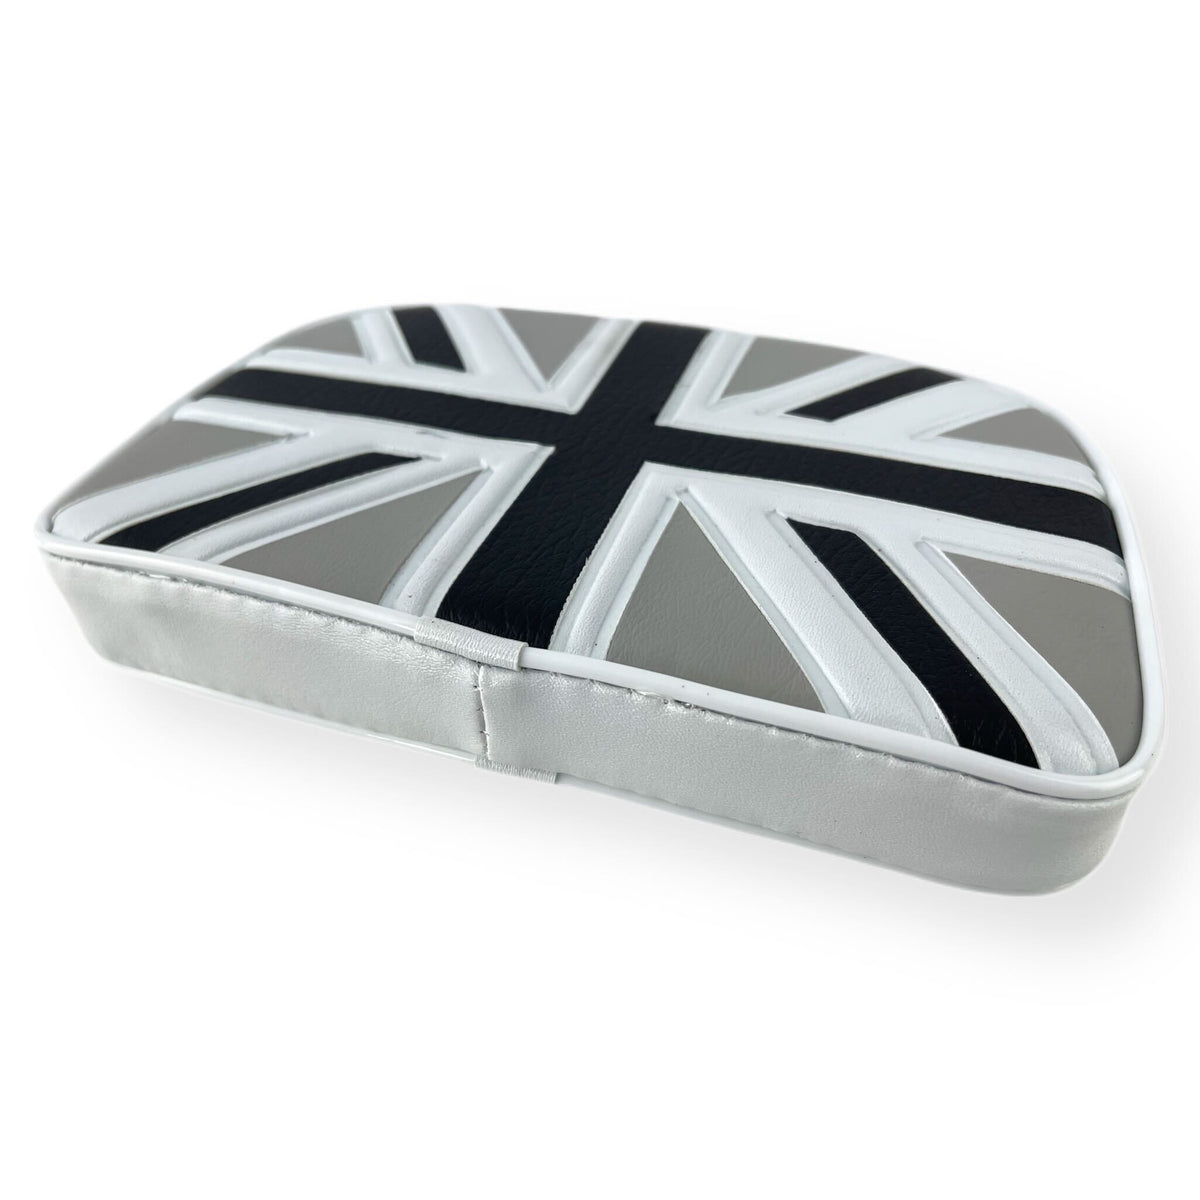 Vespa Lambretta Scooter Silver Union Jack Backrest Pad for 4 in 1 Stainless Sterling Rear Carrier